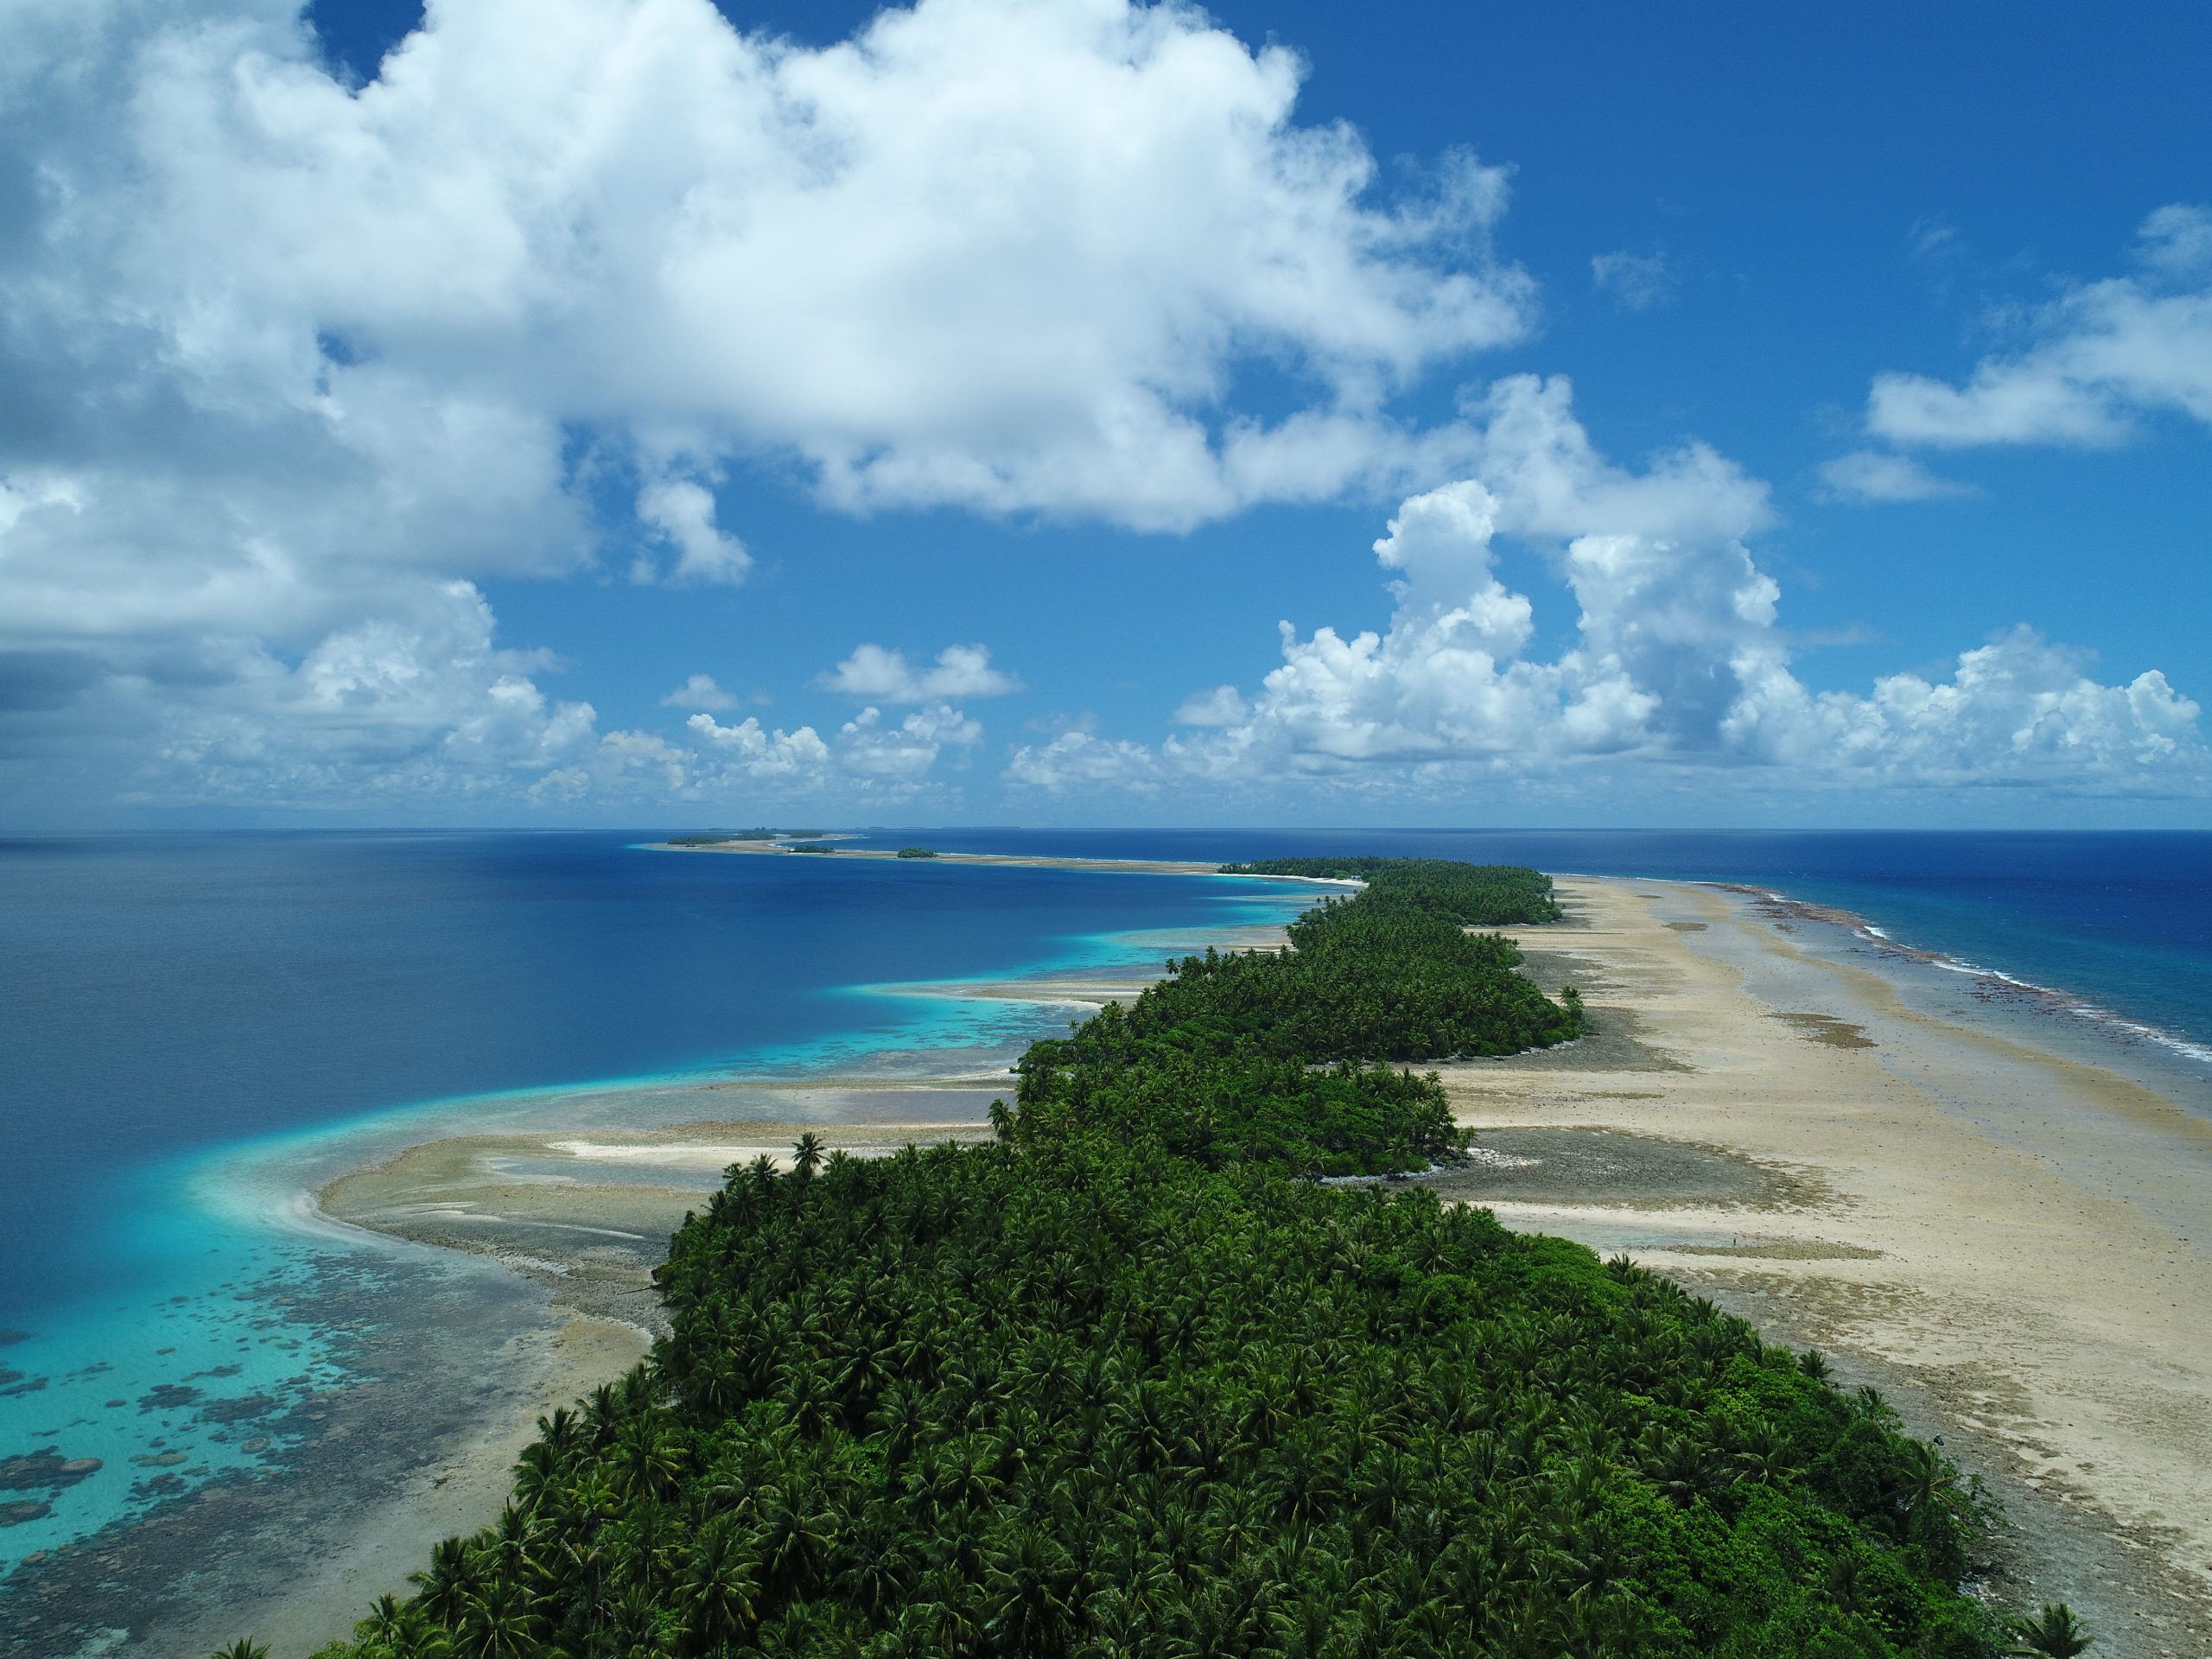 Low-lying windward reef islands of Majuro atoll. A narrow strip of vegetation is visible in the middle of a low, narrow island